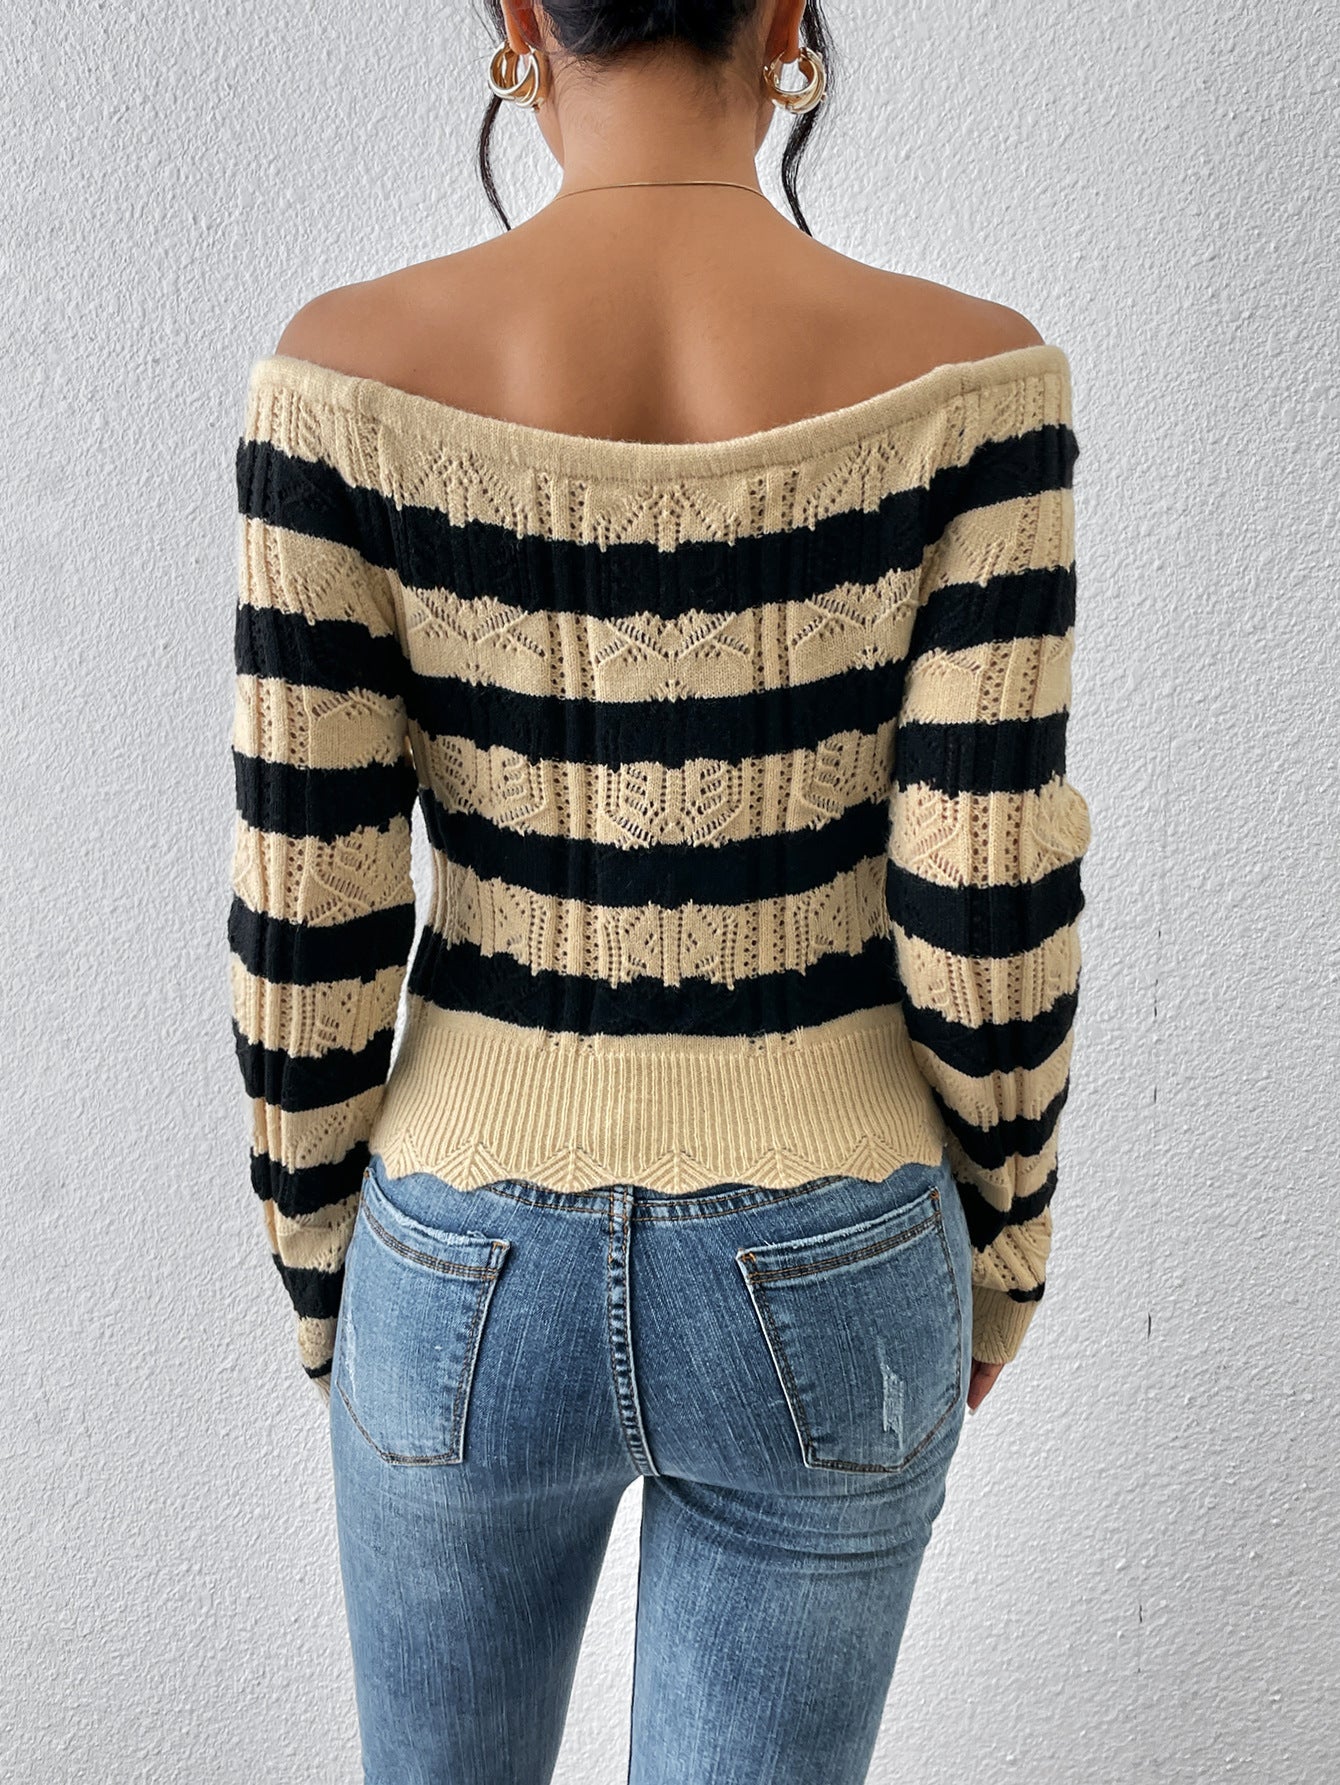 Neckless ribbed knit sweater